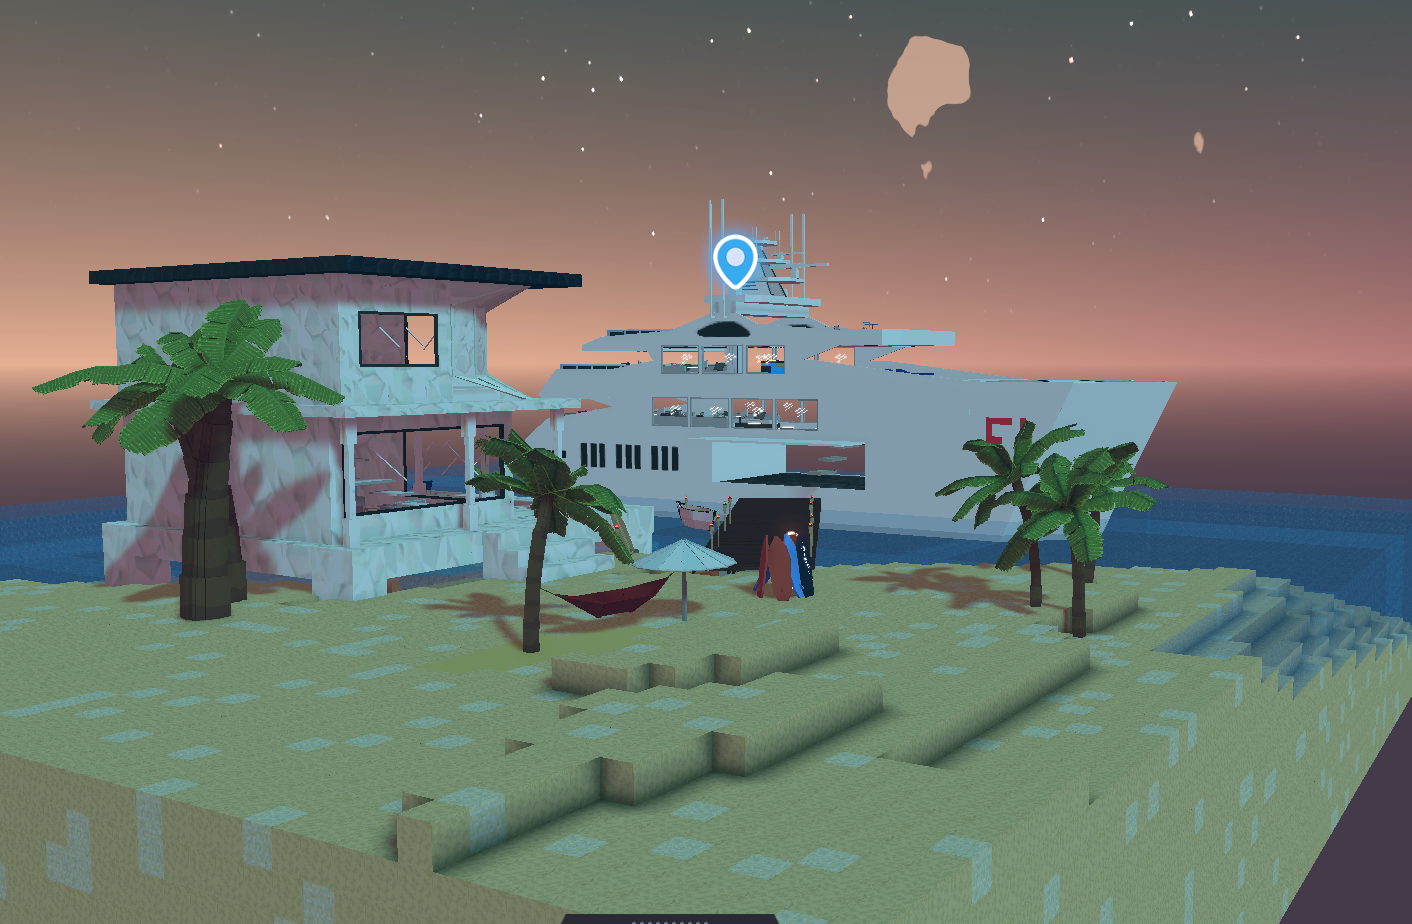 Want To Own Land In The Metaverse? Record Sales Happening As Interest Picks Up